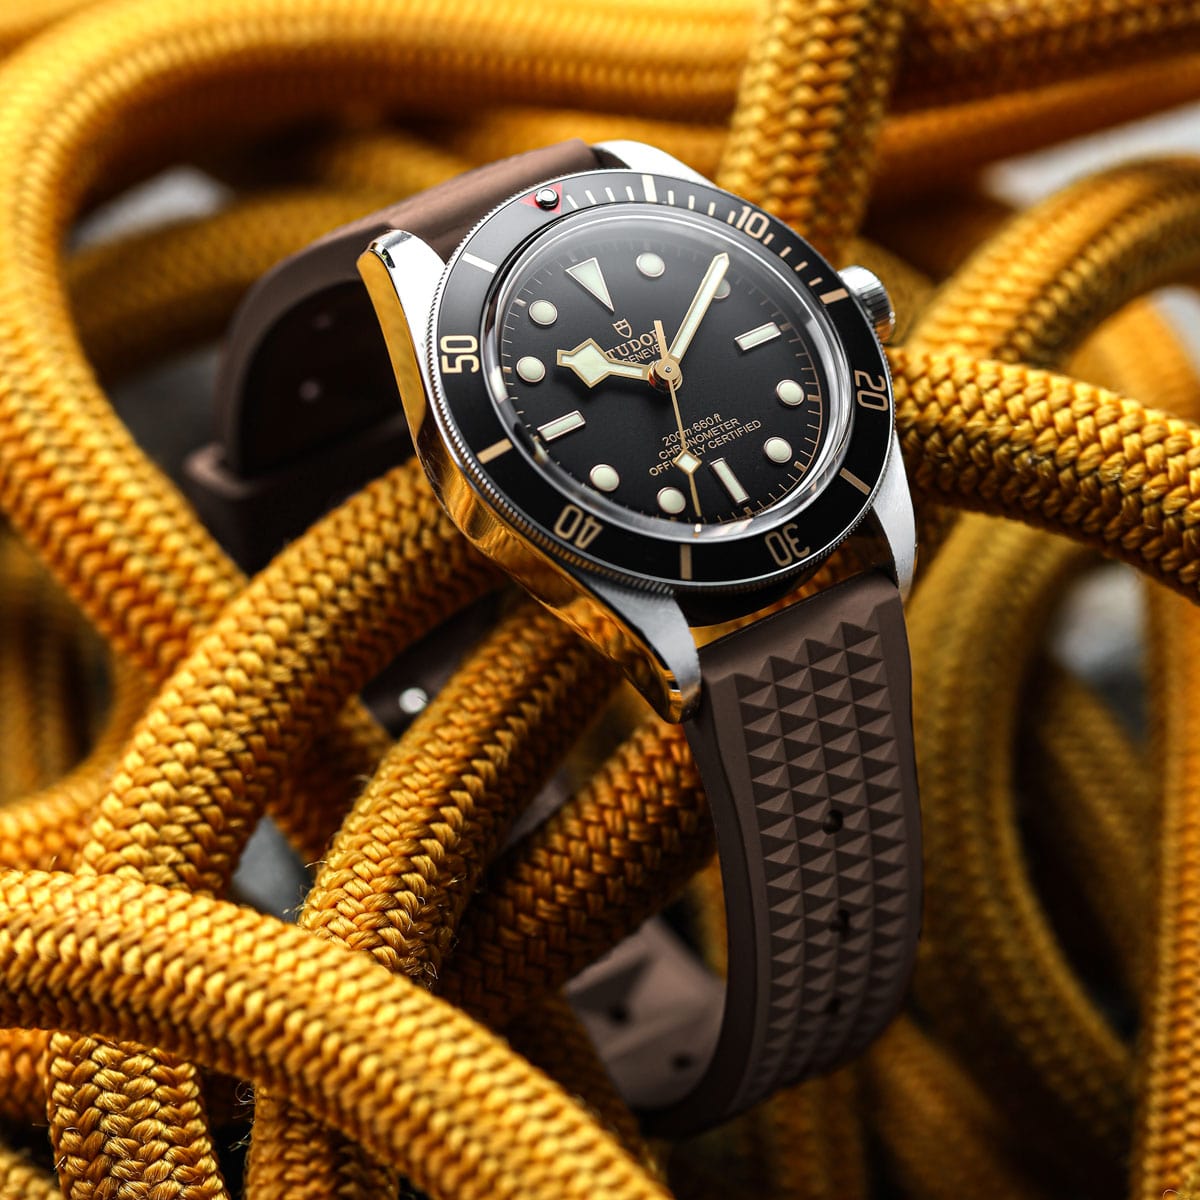 ZULUDIVER Seacroft Waffle FKM Rubber Dive Watch Strap (MkII) - Brown - Brushed Buckle